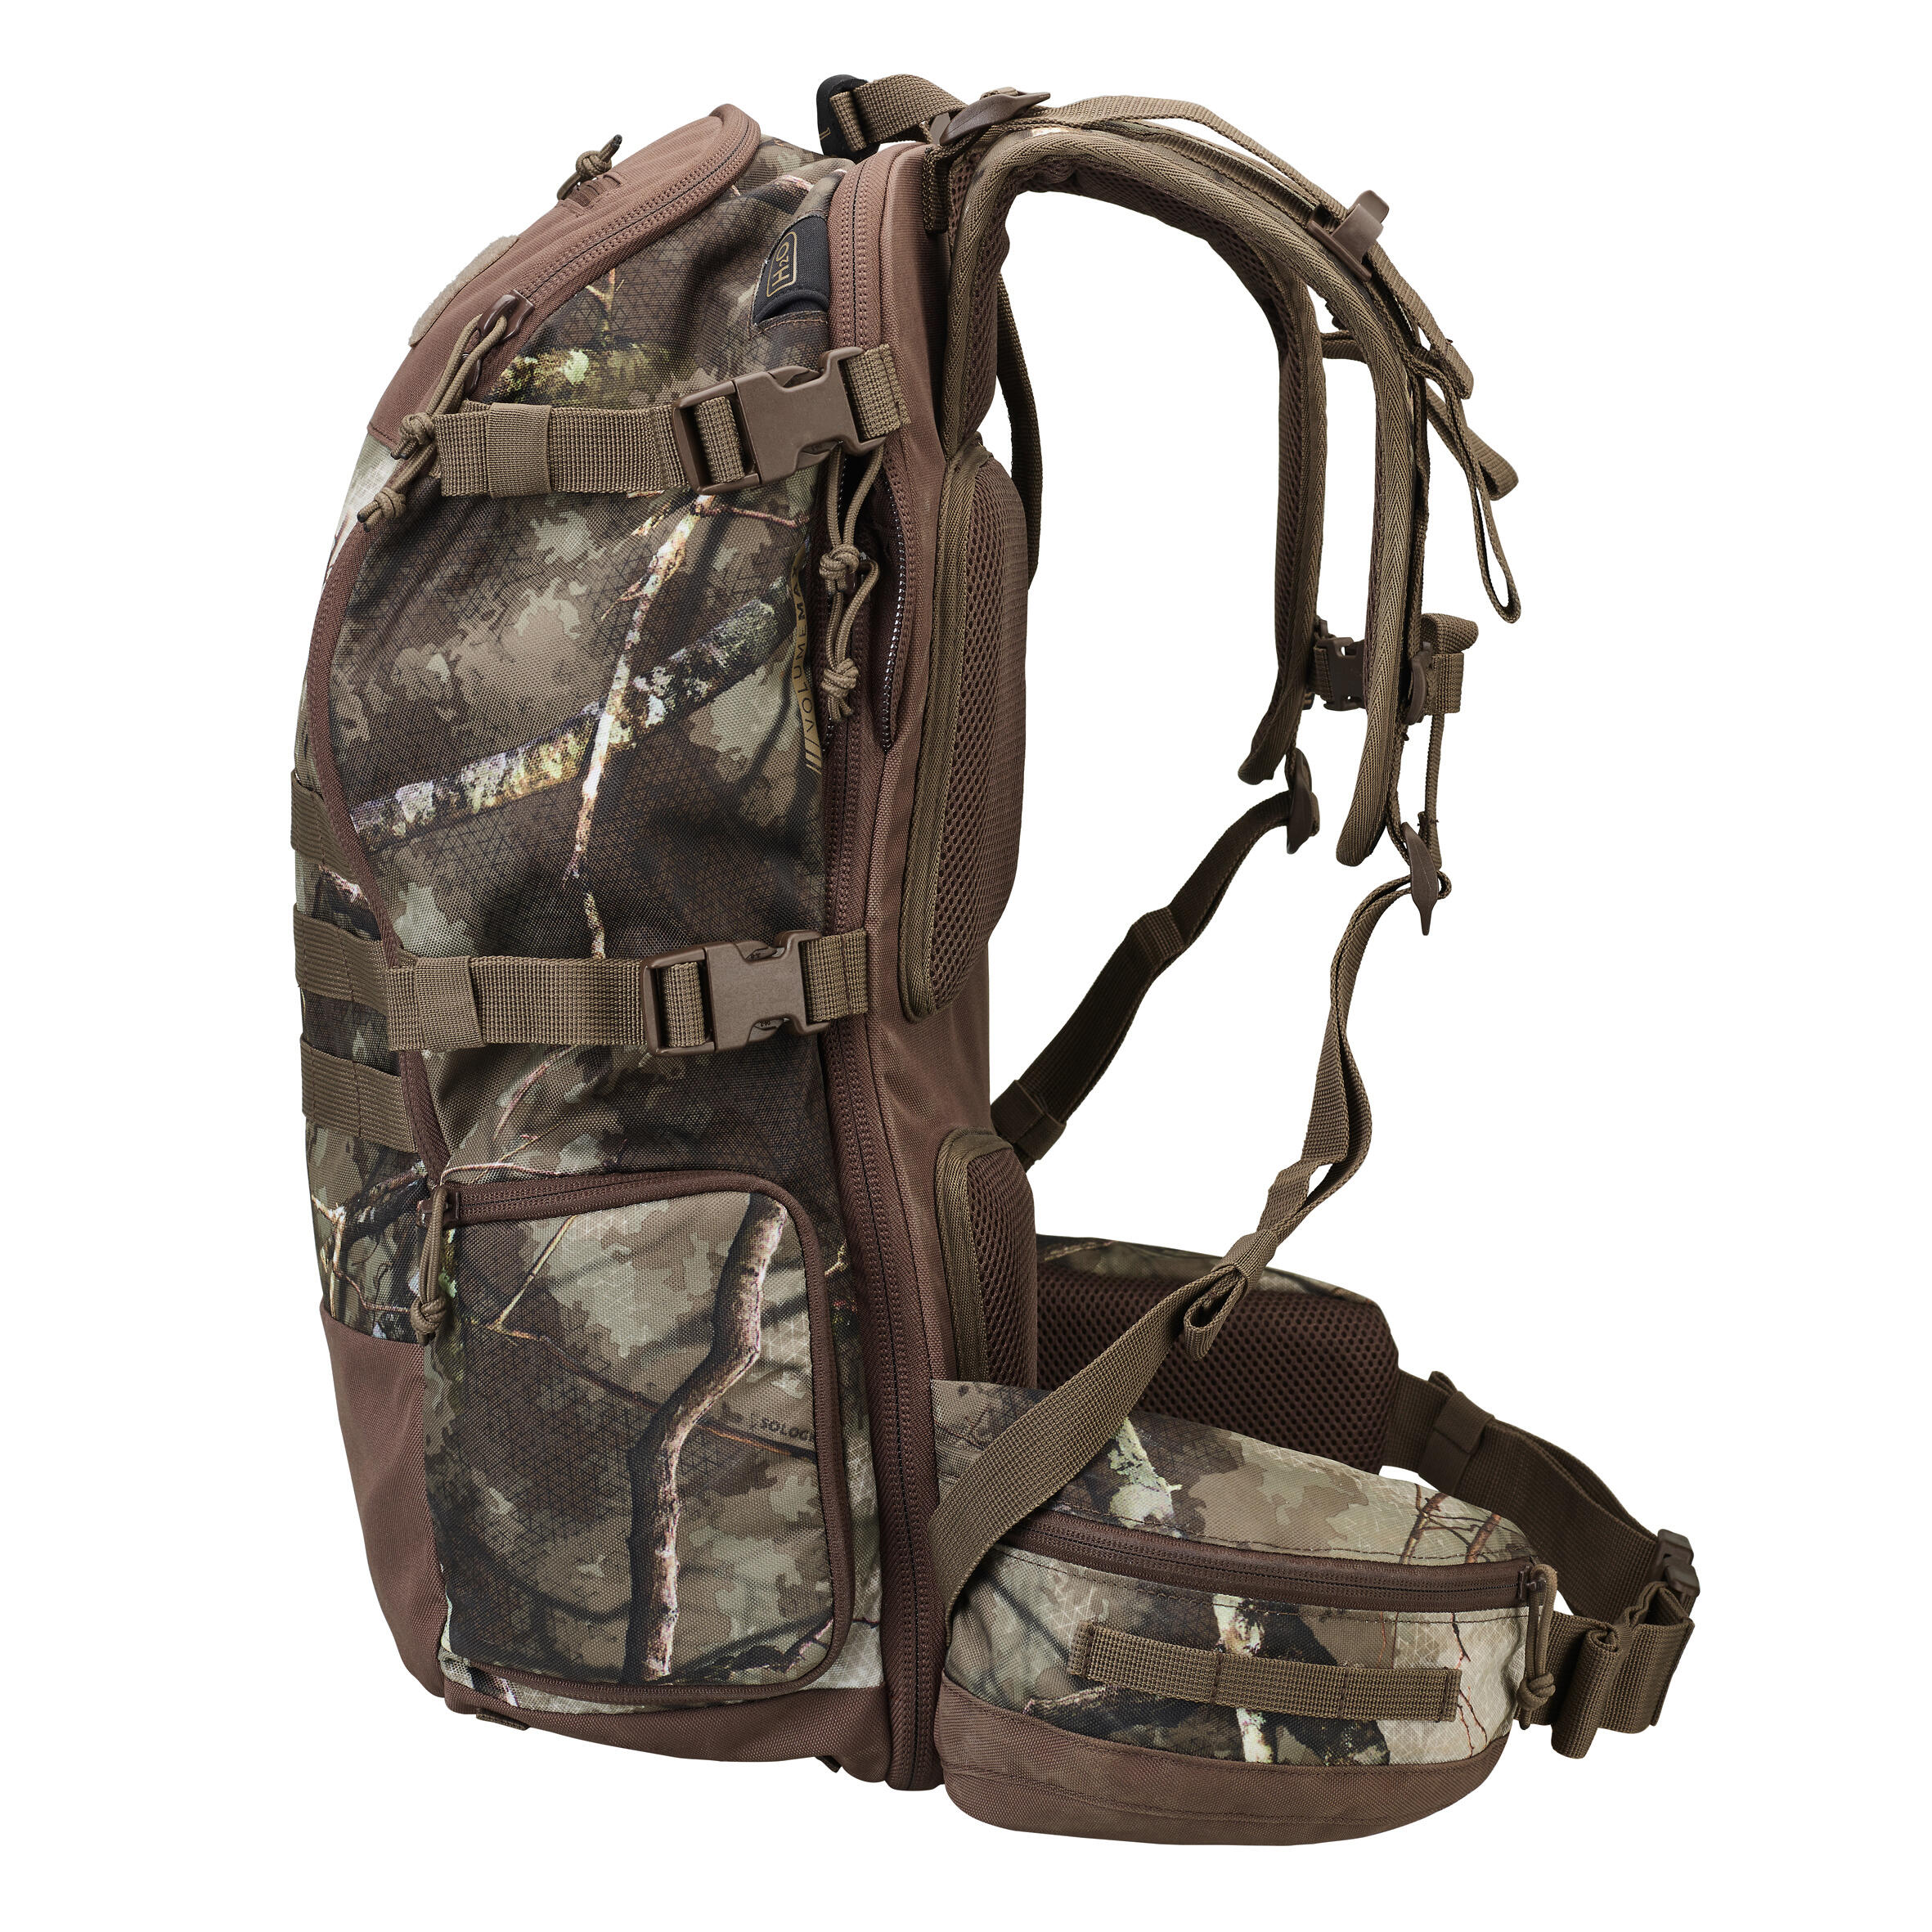 X-Access Compact Country Sport Backpack 45 Litre Treemetic Camouflage 5/11